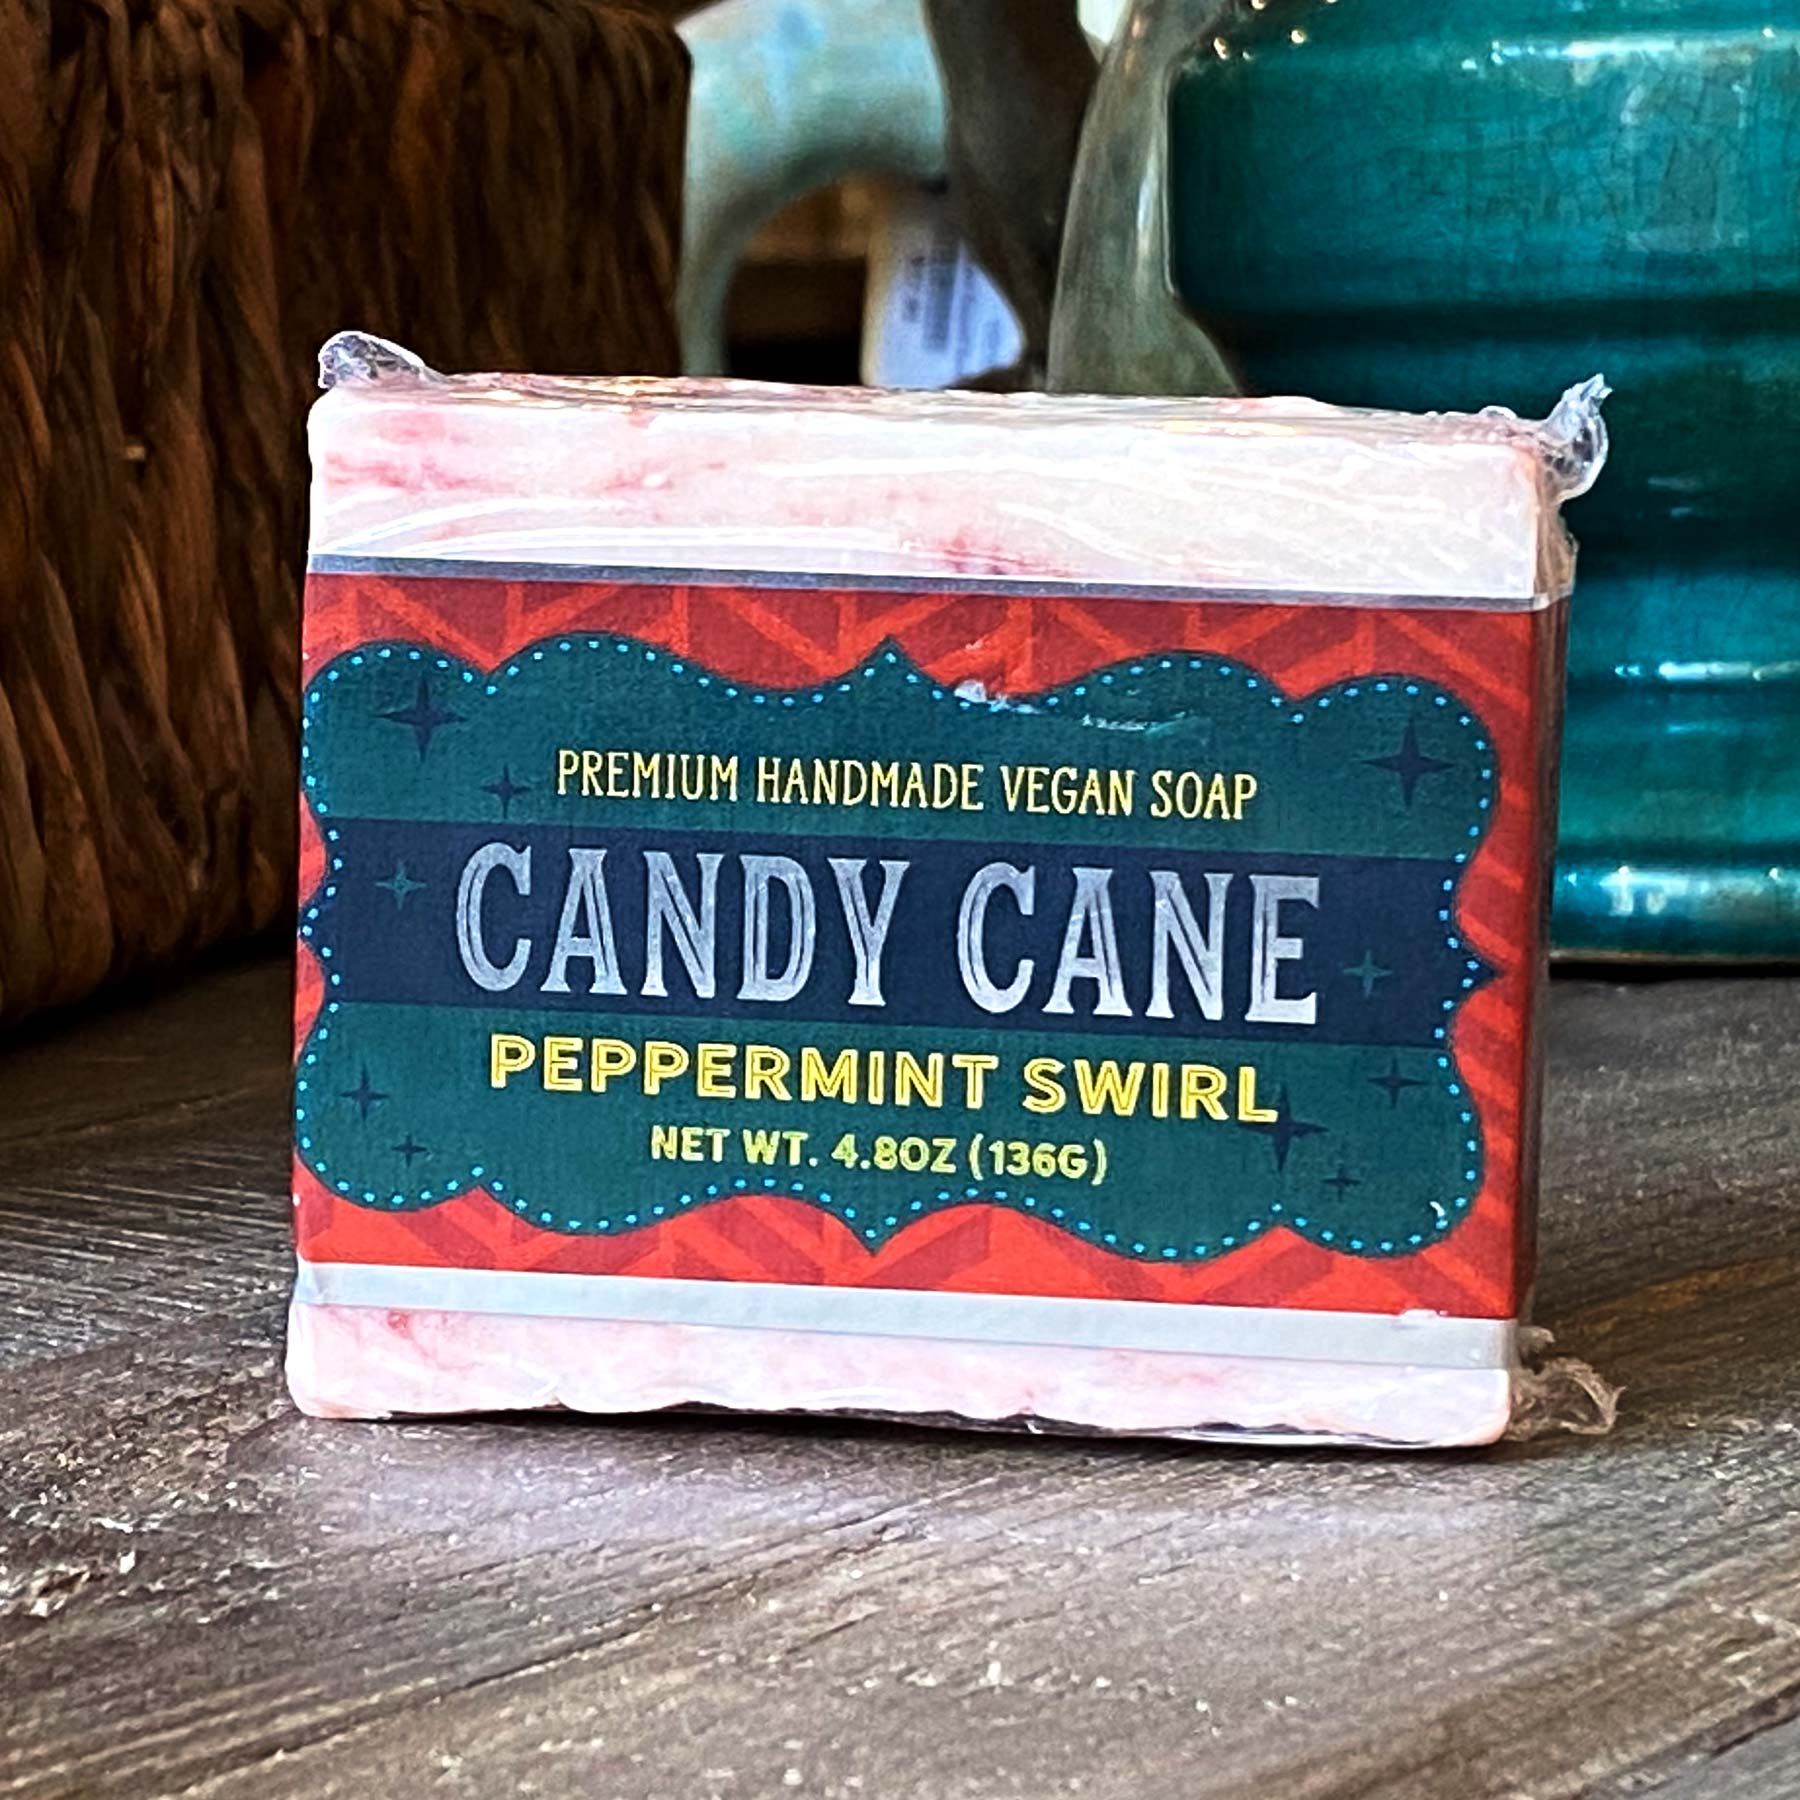 Candy Cane Holiday Scented Bar of Soap | Handmade Premium Vegan Soap - A. B. Newton and Company